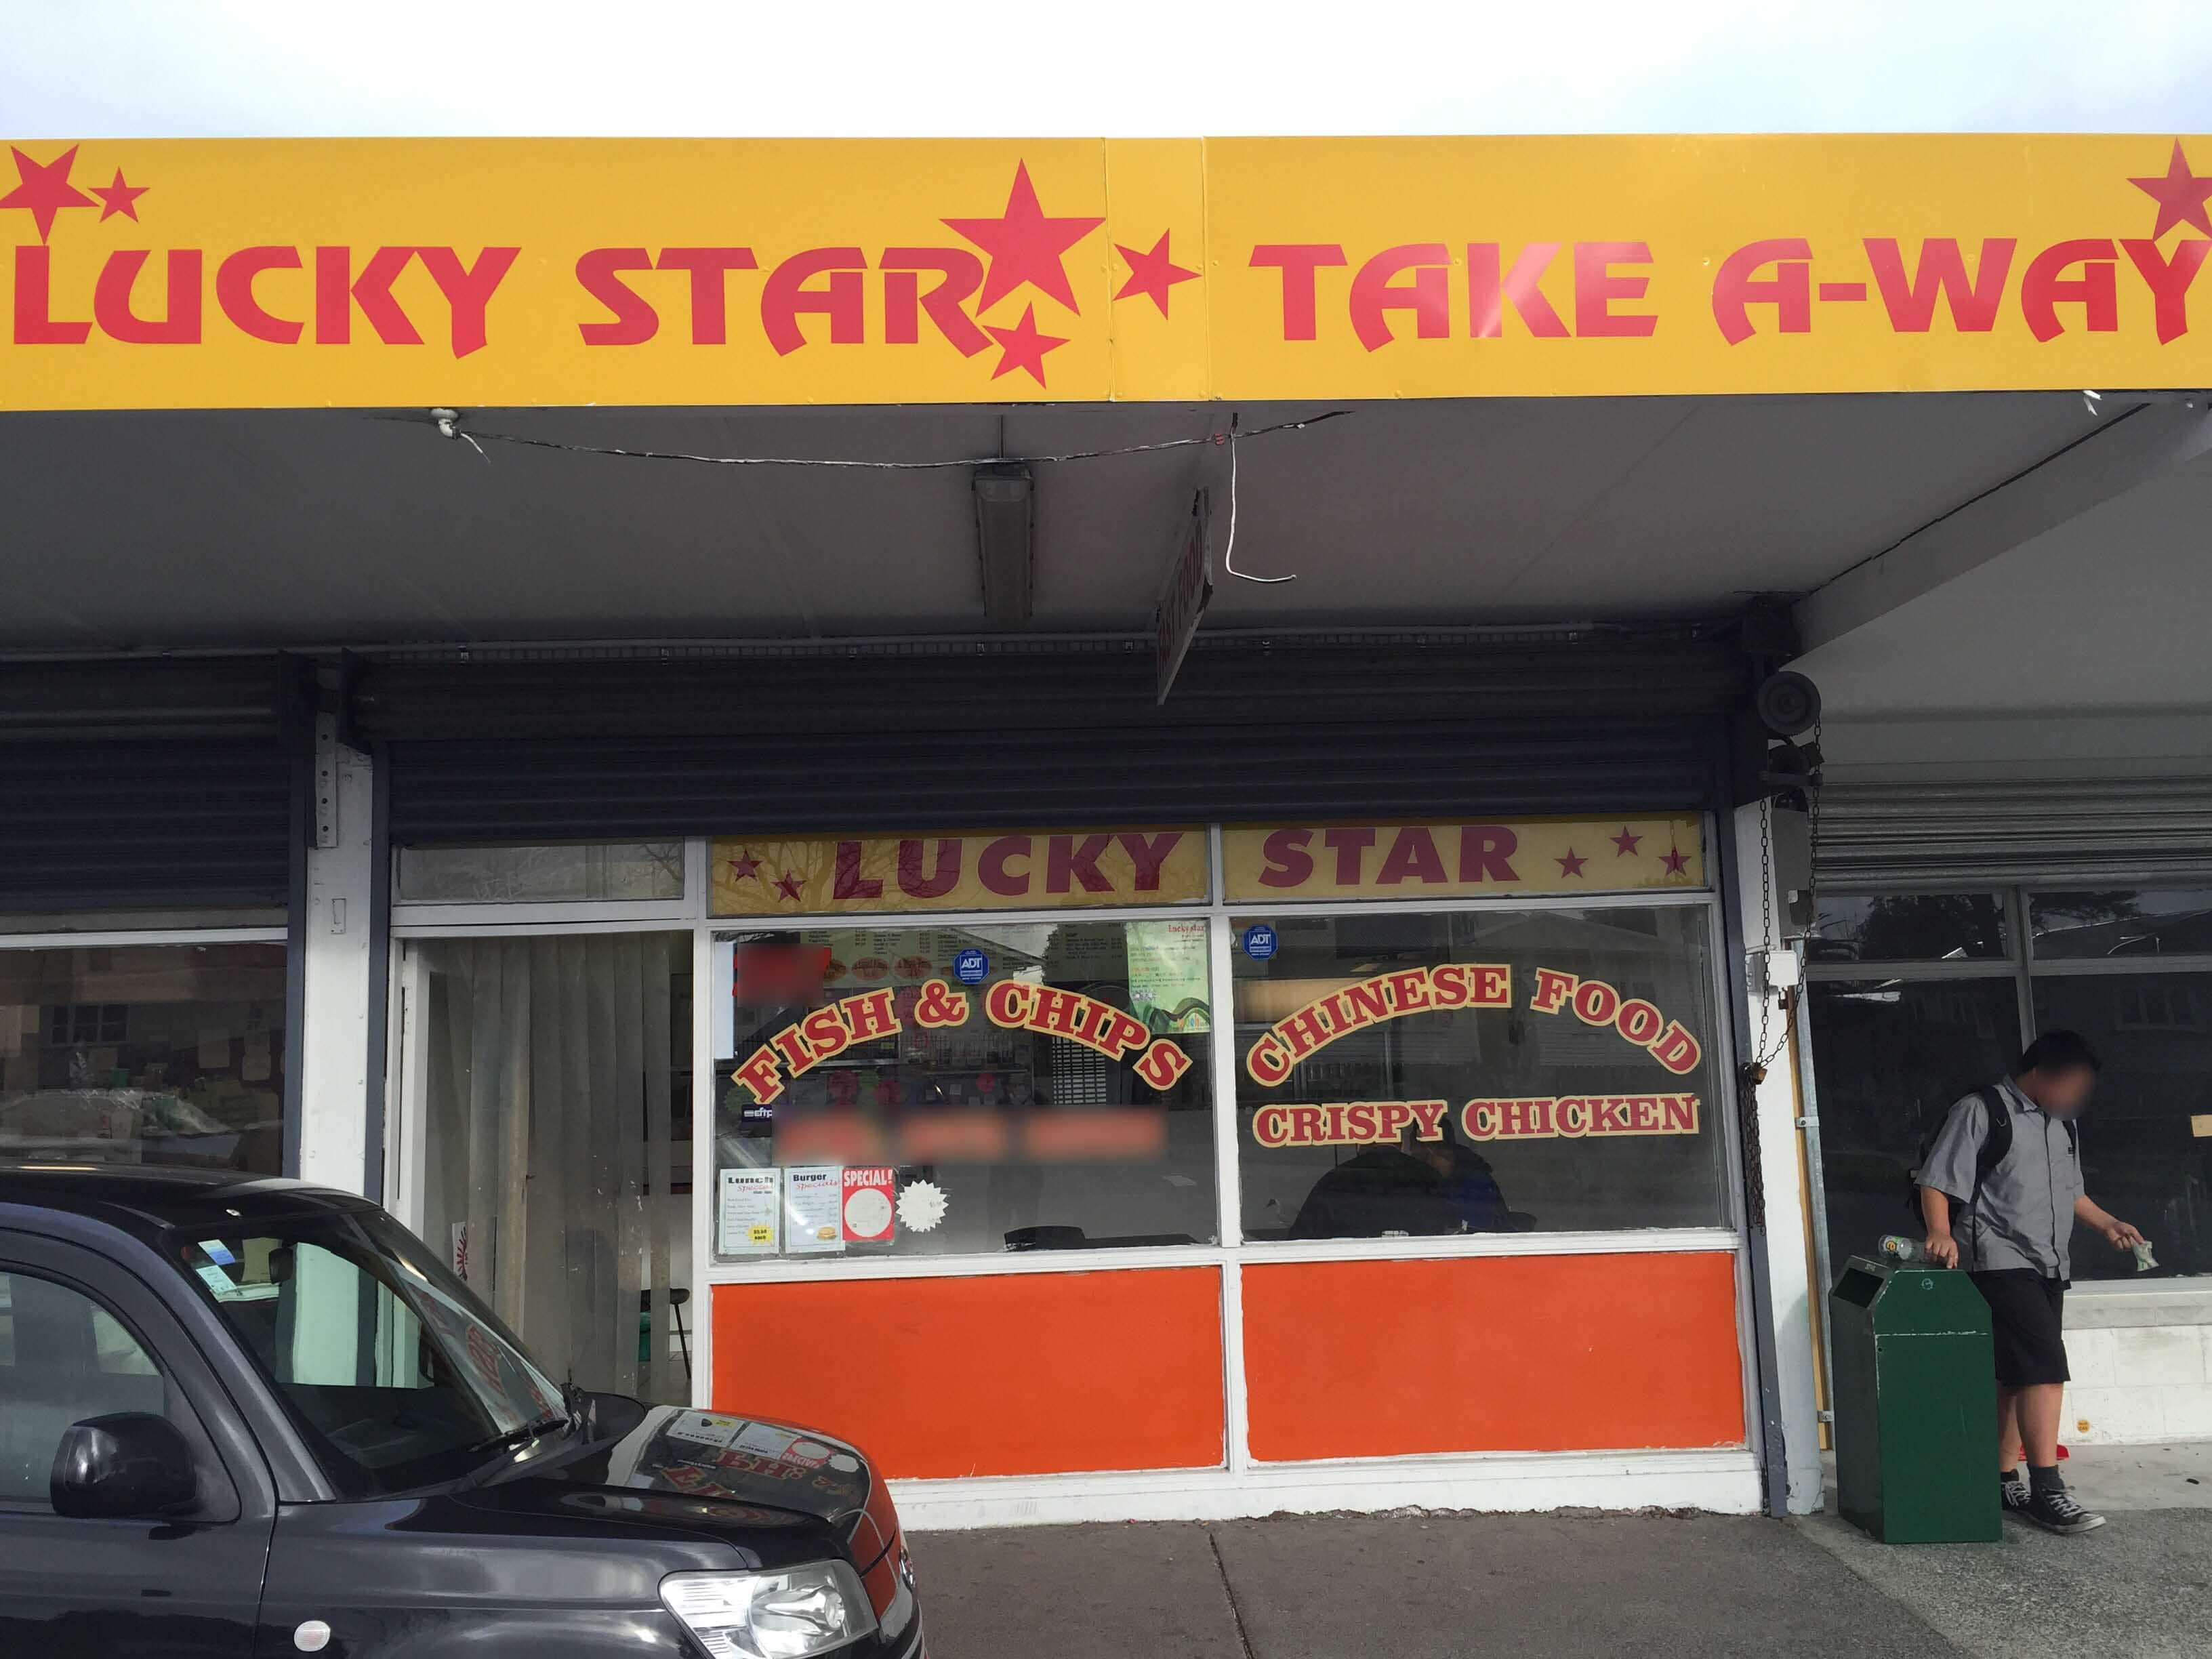 lucky star just eat